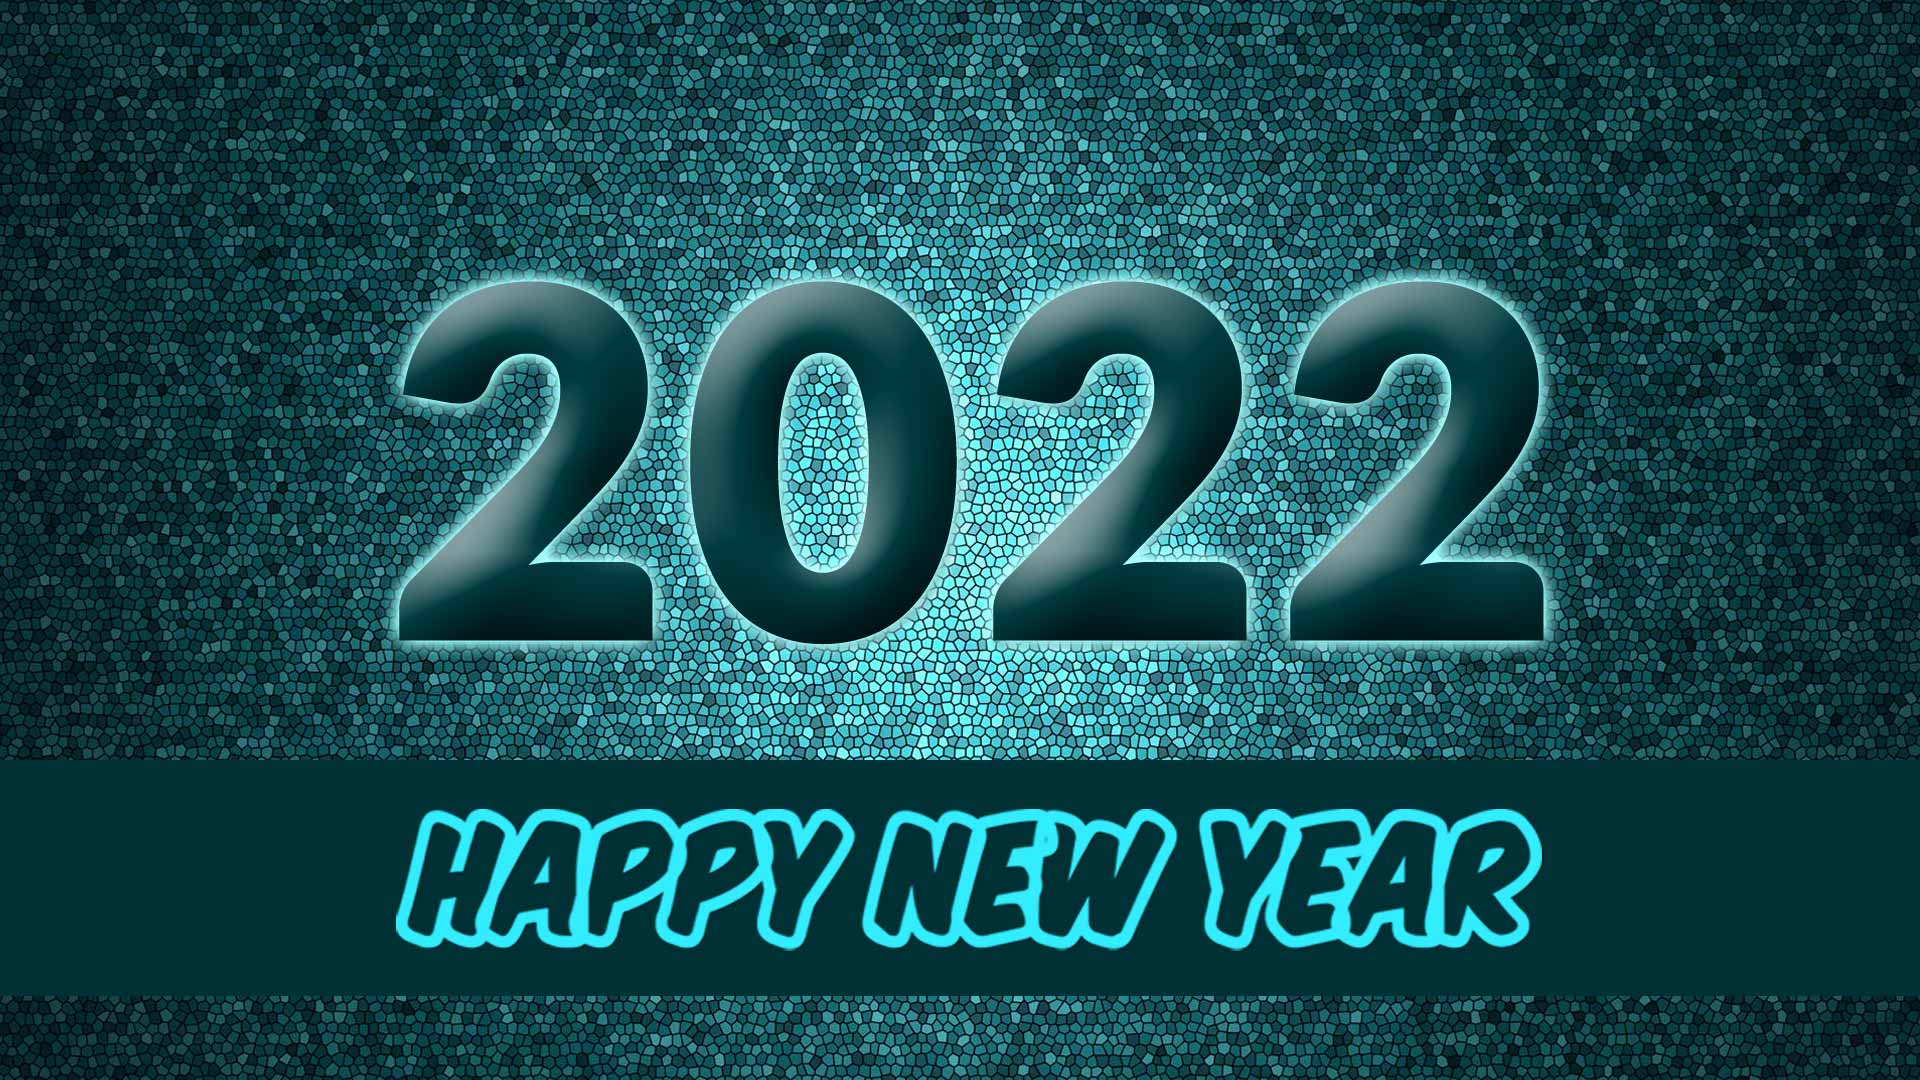 Happy New Year 2022 wallpaper full hd pc background pics free download